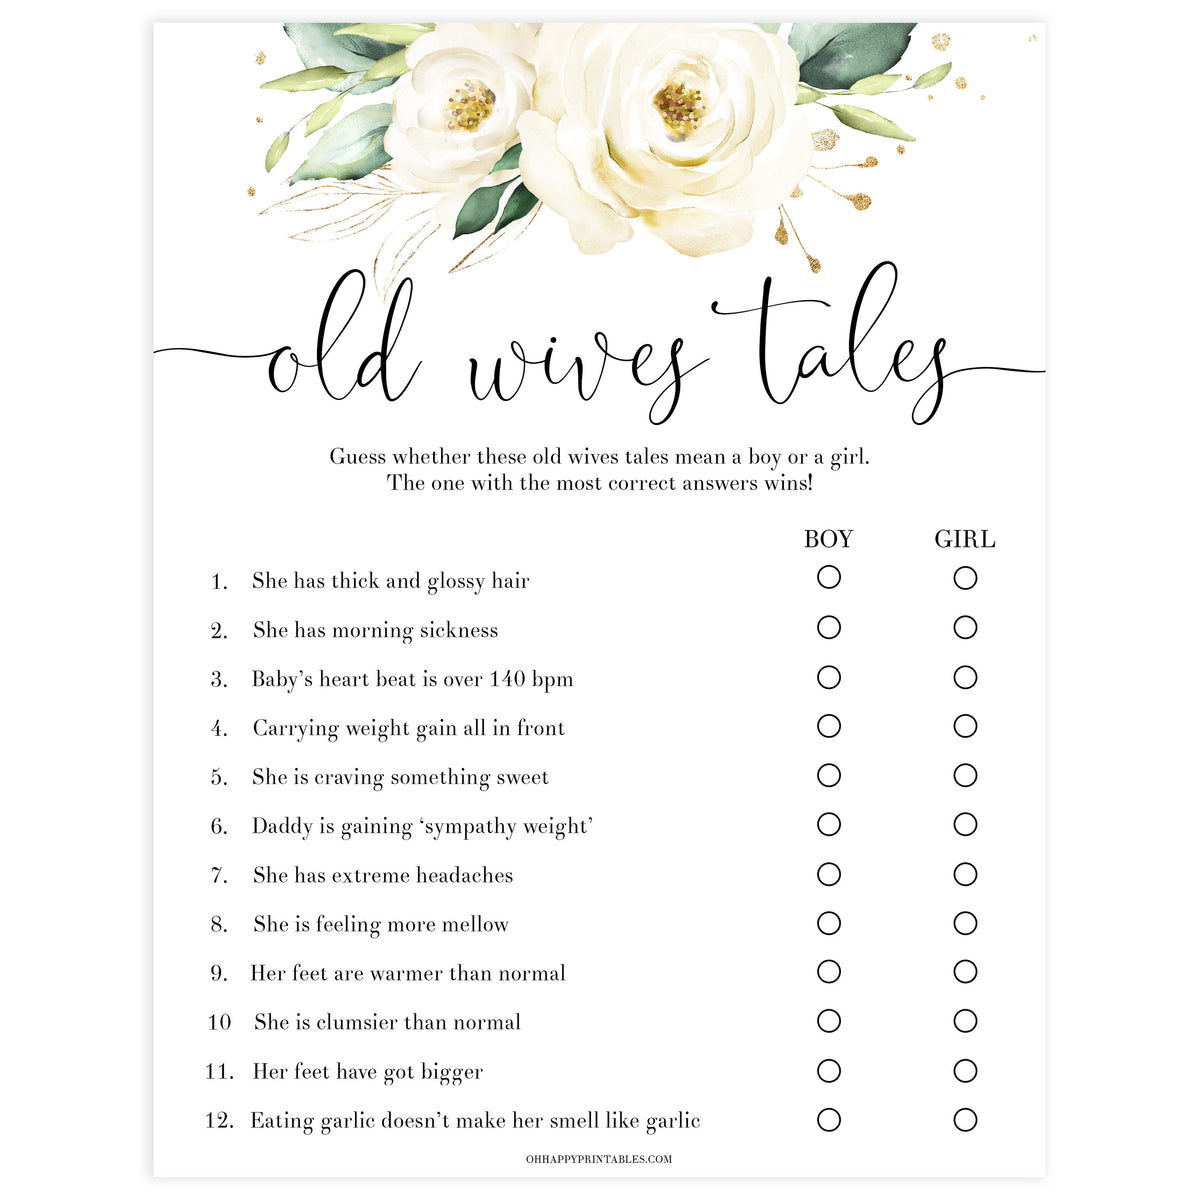 old wives tale game, Printable baby shower games, shite floral baby games, baby shower games, fun baby shower ideas, top baby shower ideas, floral baby shower, baby shower games, fun floral baby shower ideas